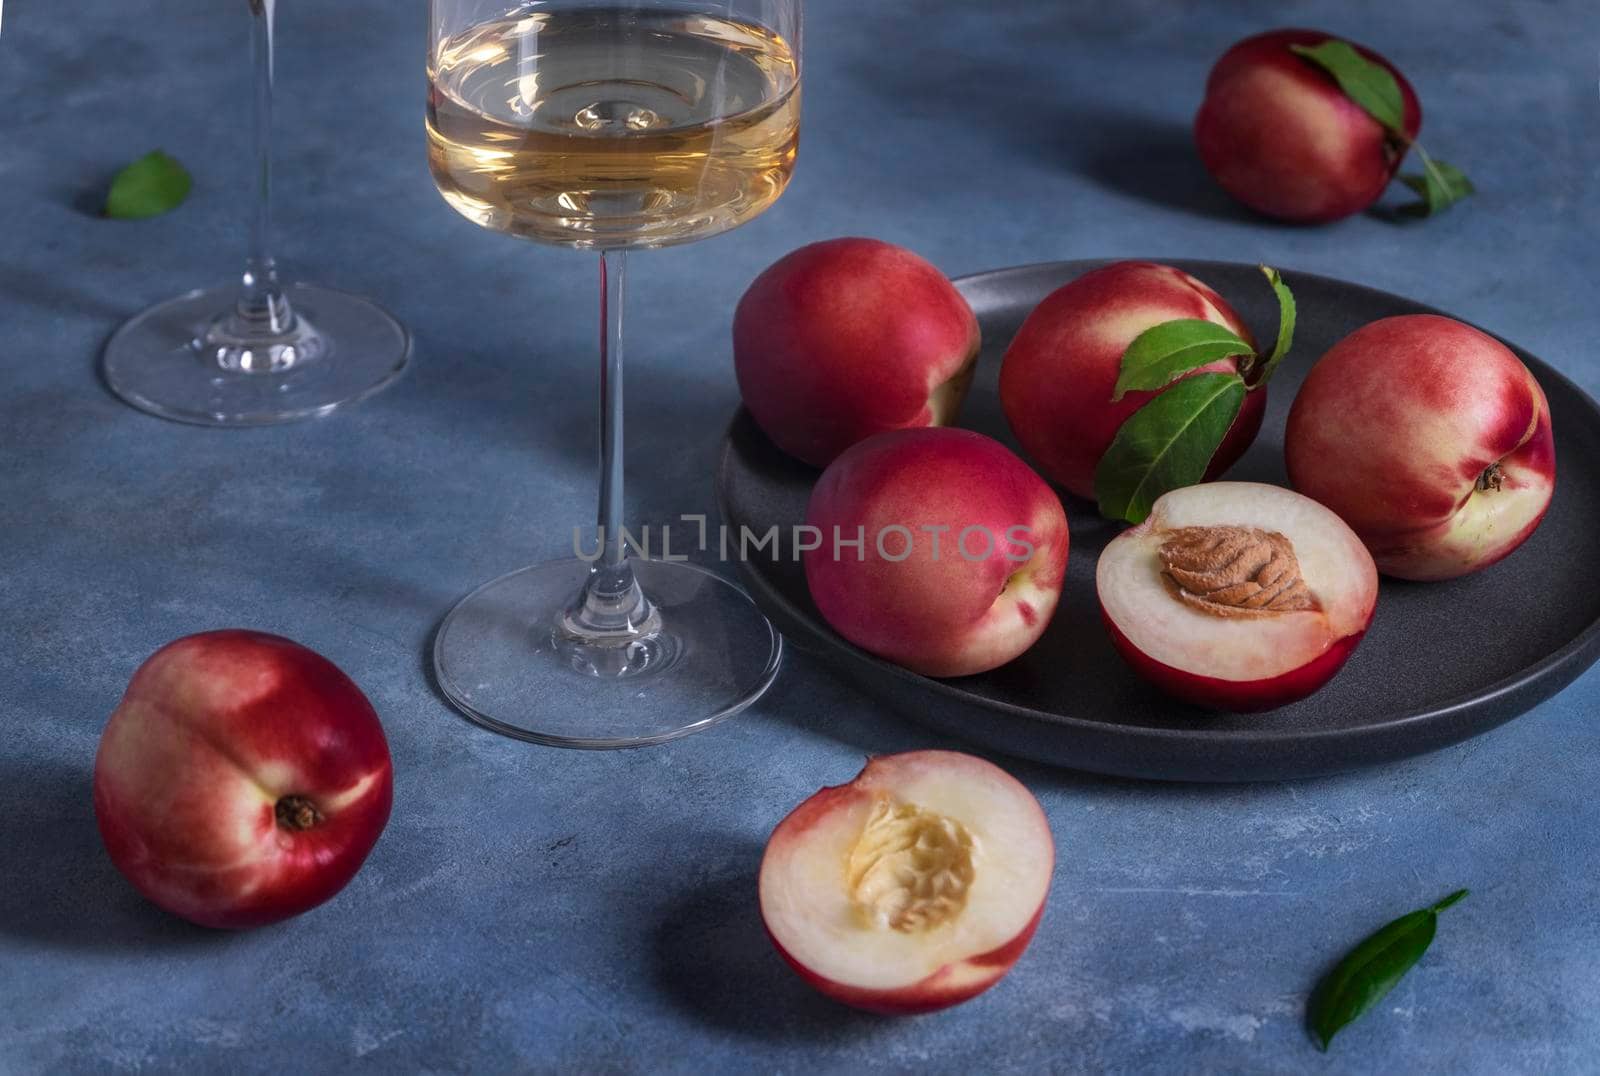 Several ripe peaches or nectarines on a black ceramic plate and a glass of white wine sit on a blue plaster-textured surface. Selective focus.